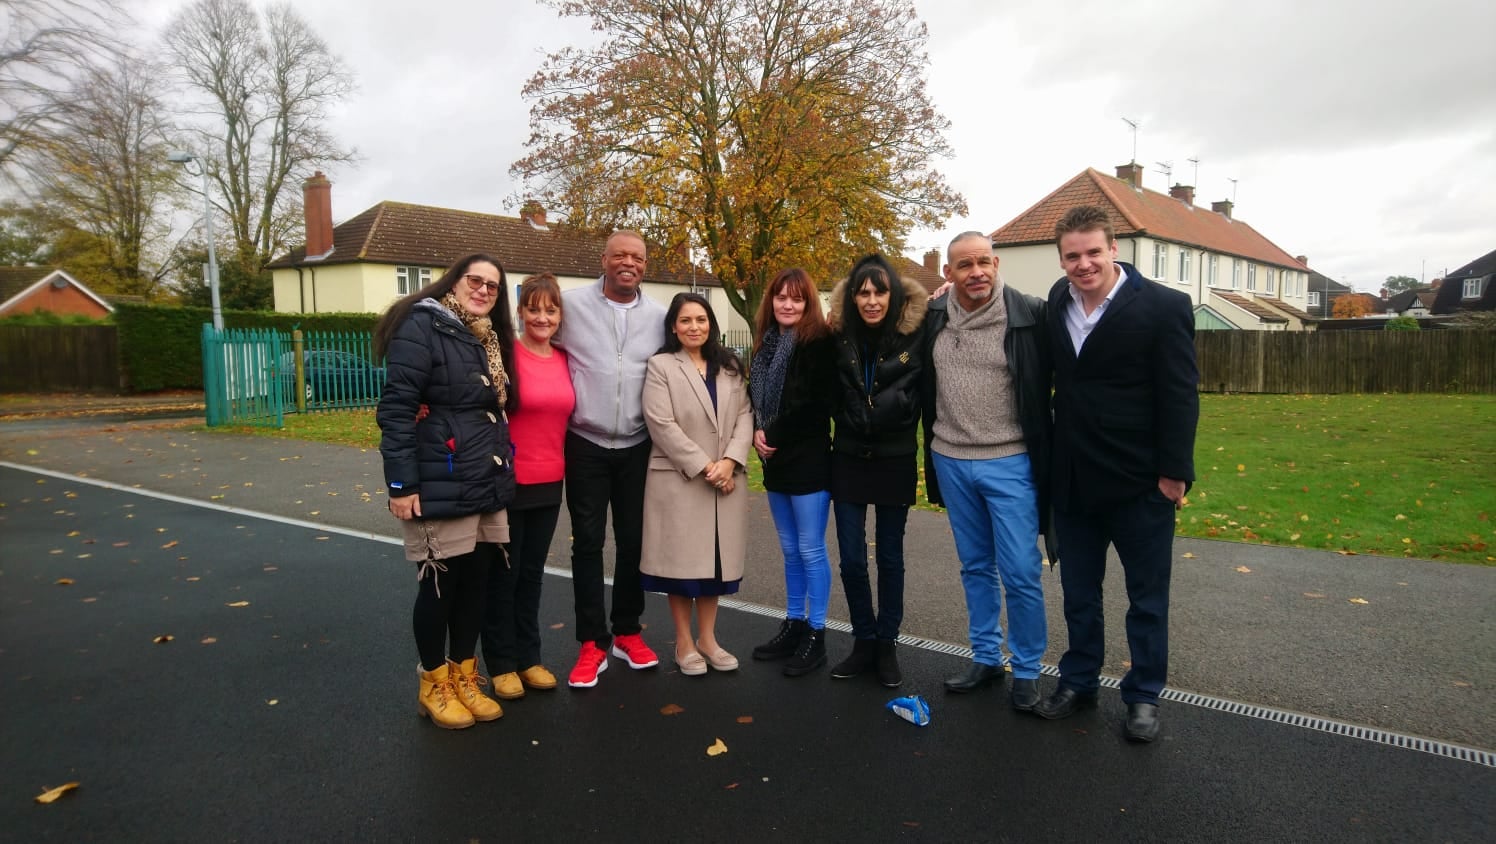 Priti Patel Visits Ipswich to meet with Reflections Youth Volunteers